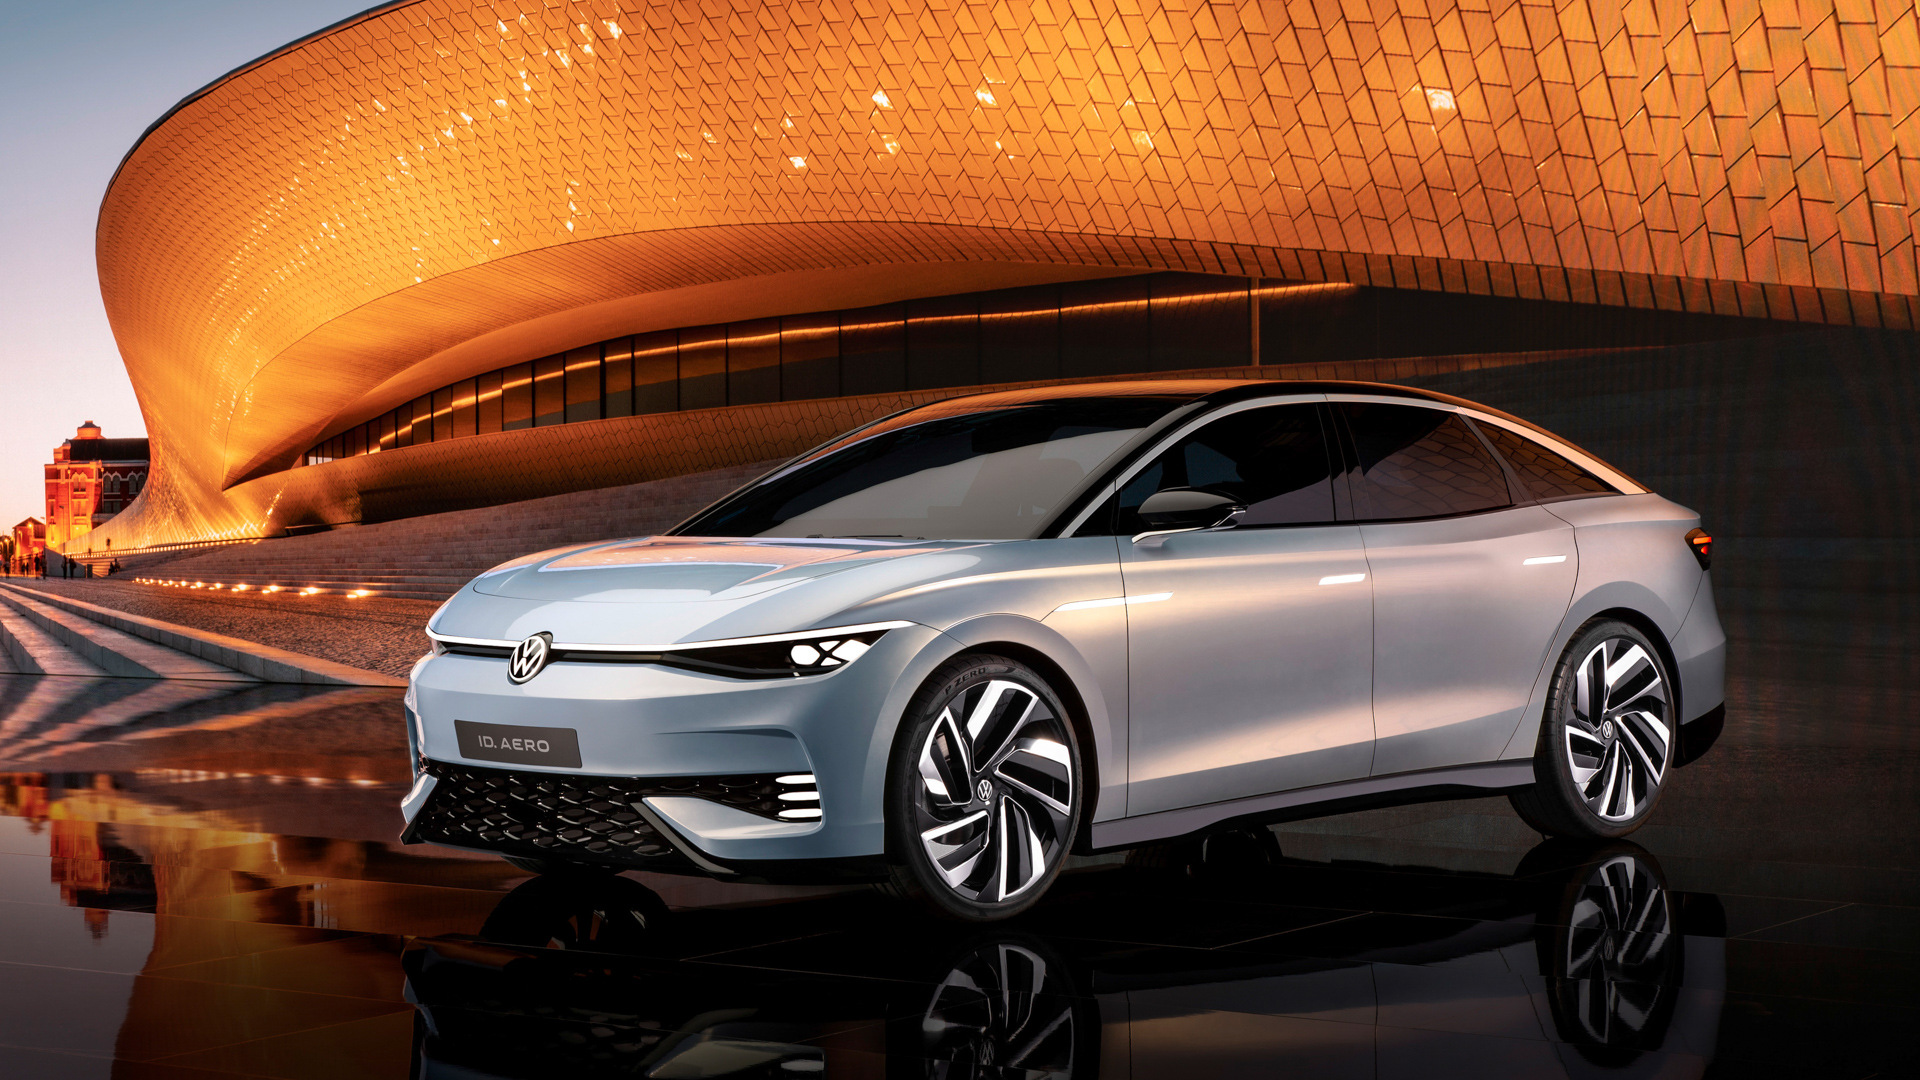 Volkswagen ID.Aero EV Concept Is the Future Of Stylish VW Cars Coming to US